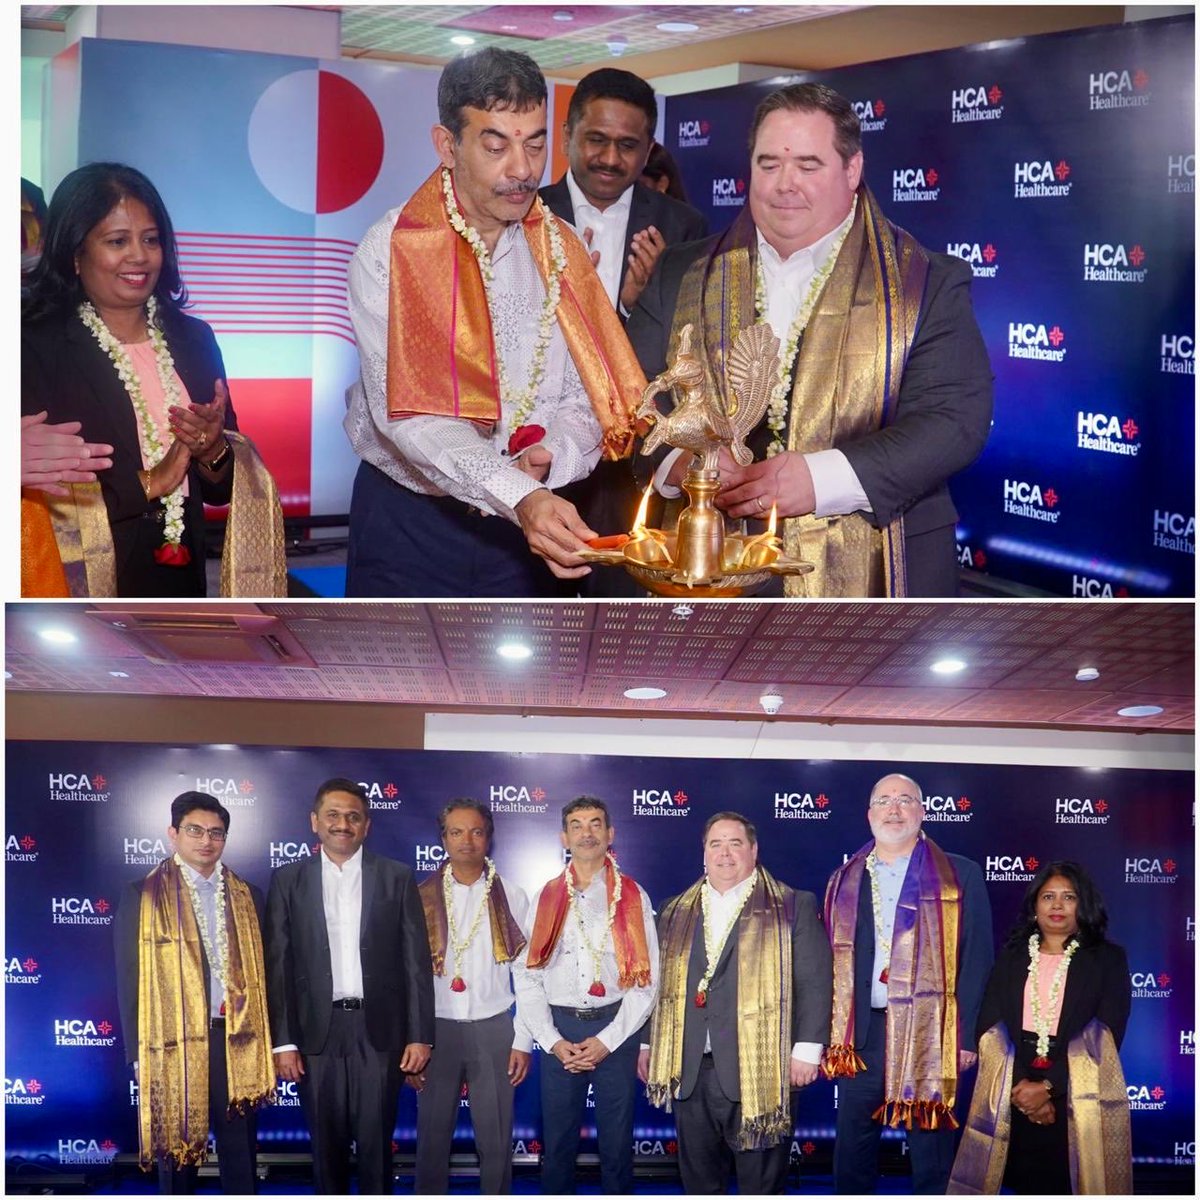 Welcome to the leading provider of healthcare services in the US @HCAhealthcare to Hyderabad. The Hyd Global Capability Centre will focus on providing automation and AI services to the 186 hospitals and 2400 + sites of ambulatory care they operate